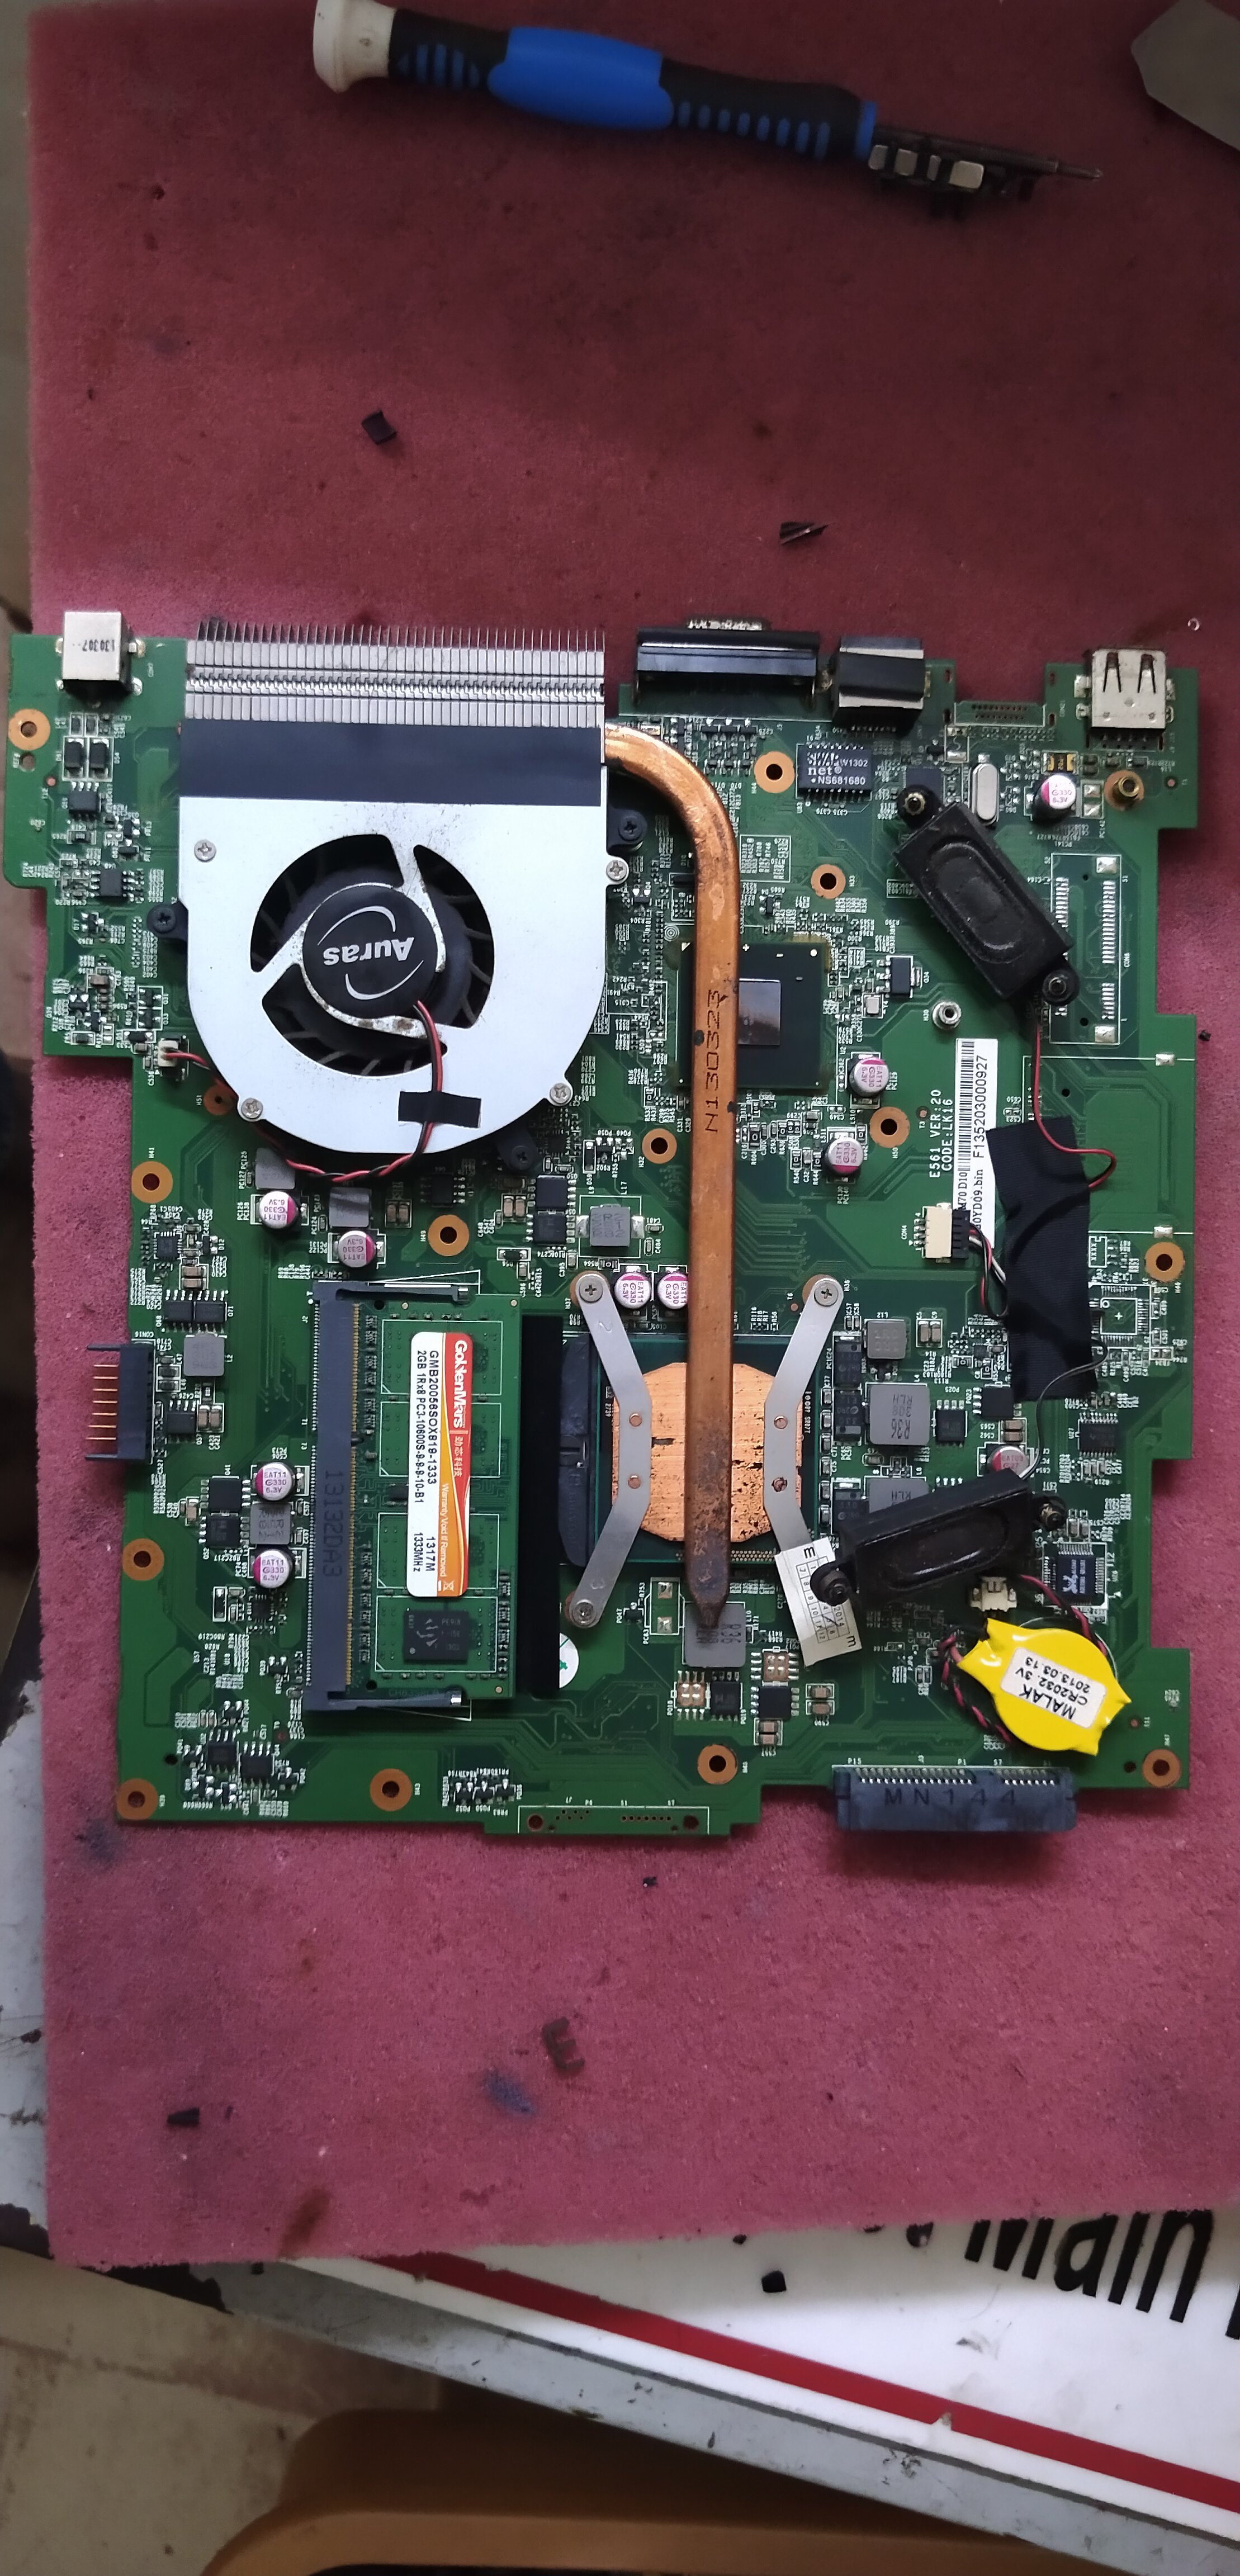 hasee hec41 motherboard repairing centre in chennai,chennai,Services,Free Classifieds,Post Free Ads,77traders.com